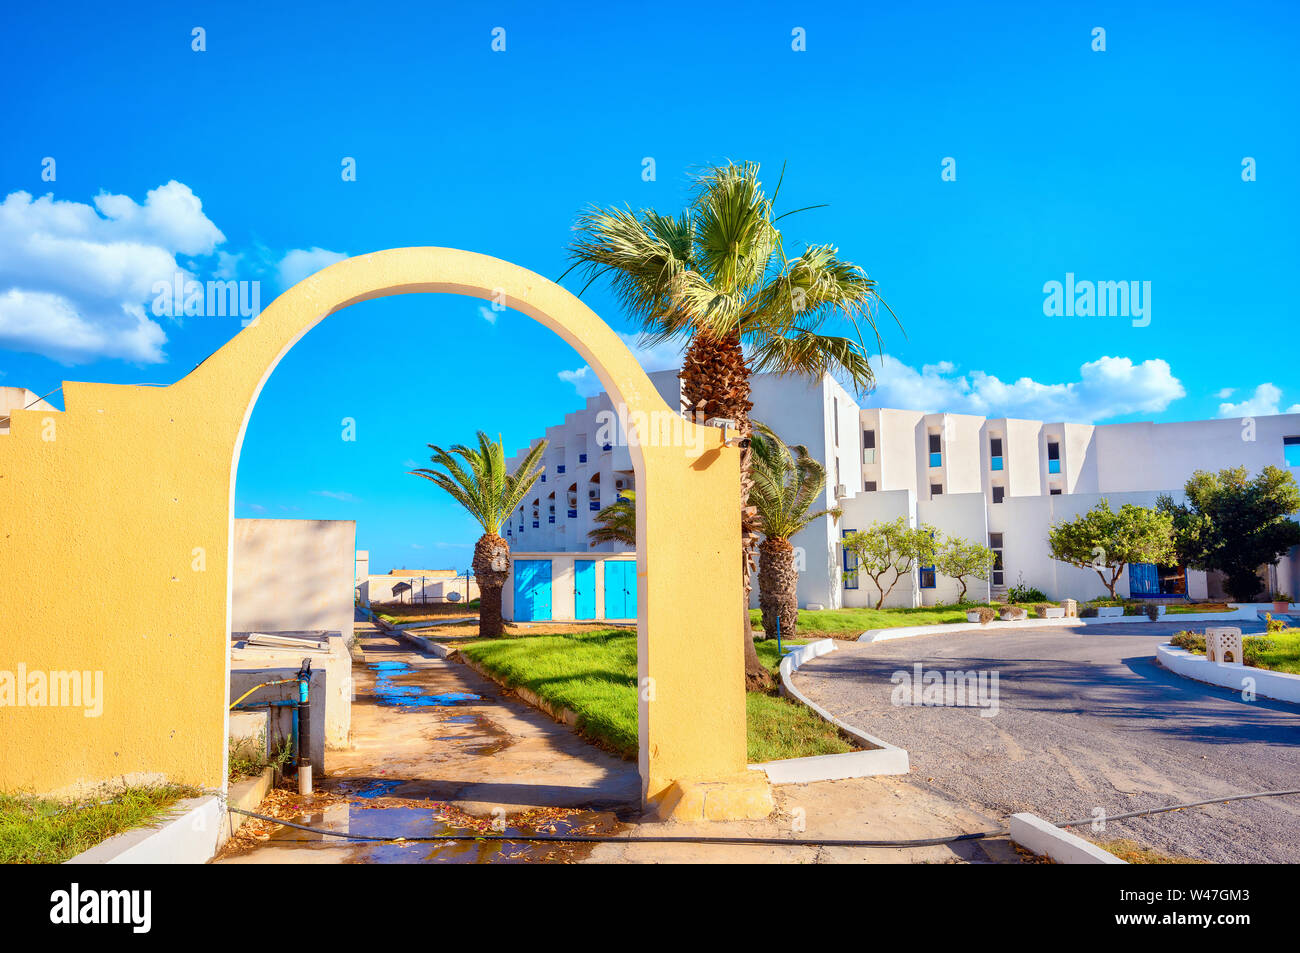 Landscape with modern hotel in coastal resort town. Nabeul, Tunisia, North Africa Stock Photo